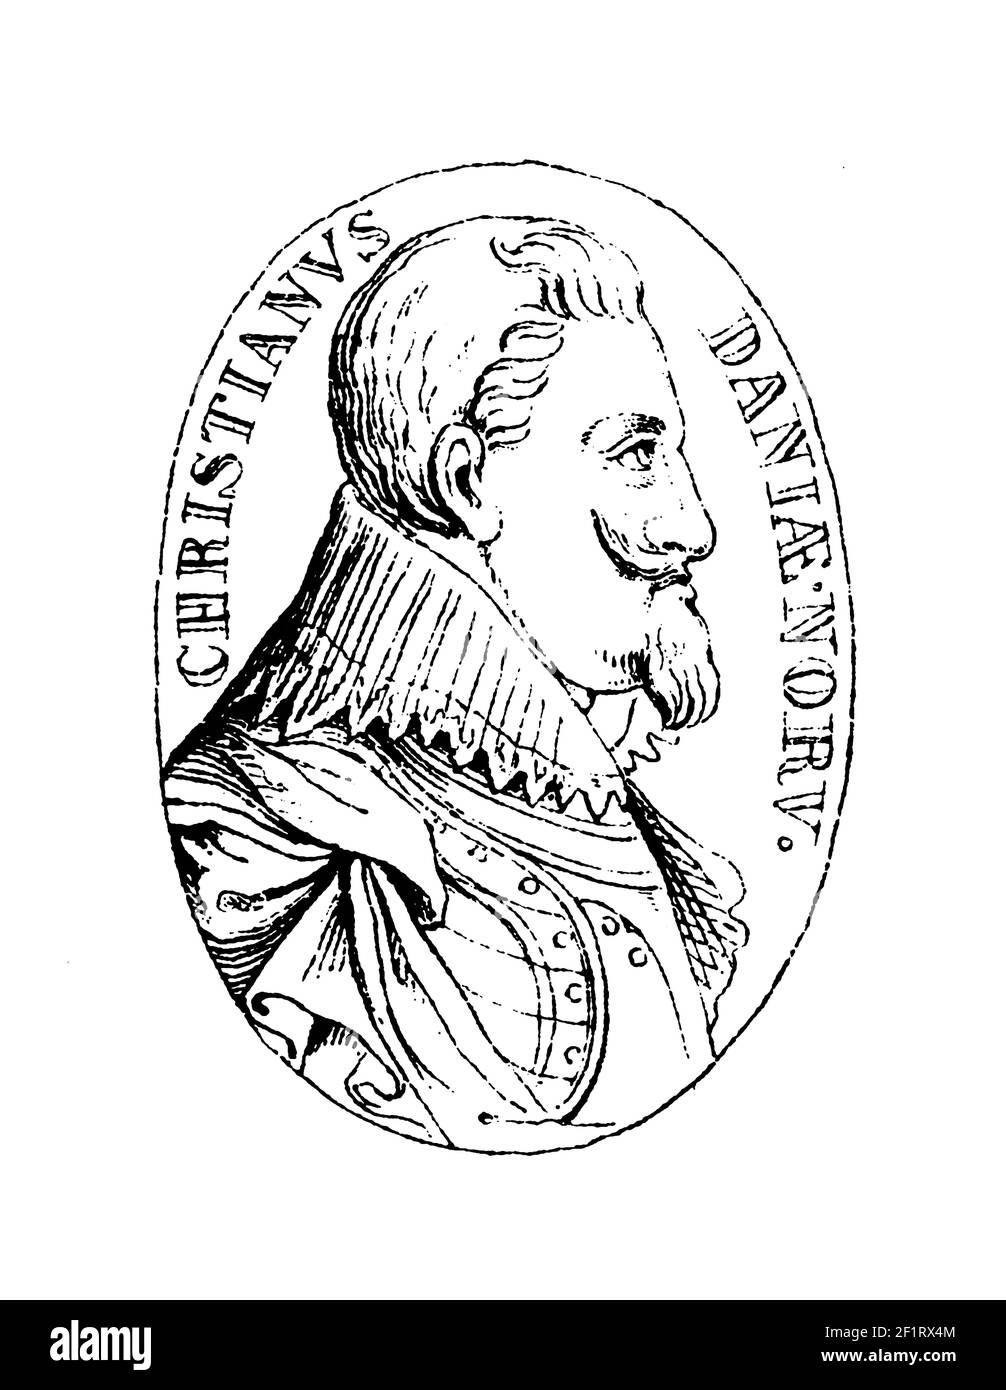 19th-century illustration of a portrait of Christian IV, King of Denmark and Norway. Born on April 12, 1577 in Hilerod, Denmark, Christian IV died on Stock Photo